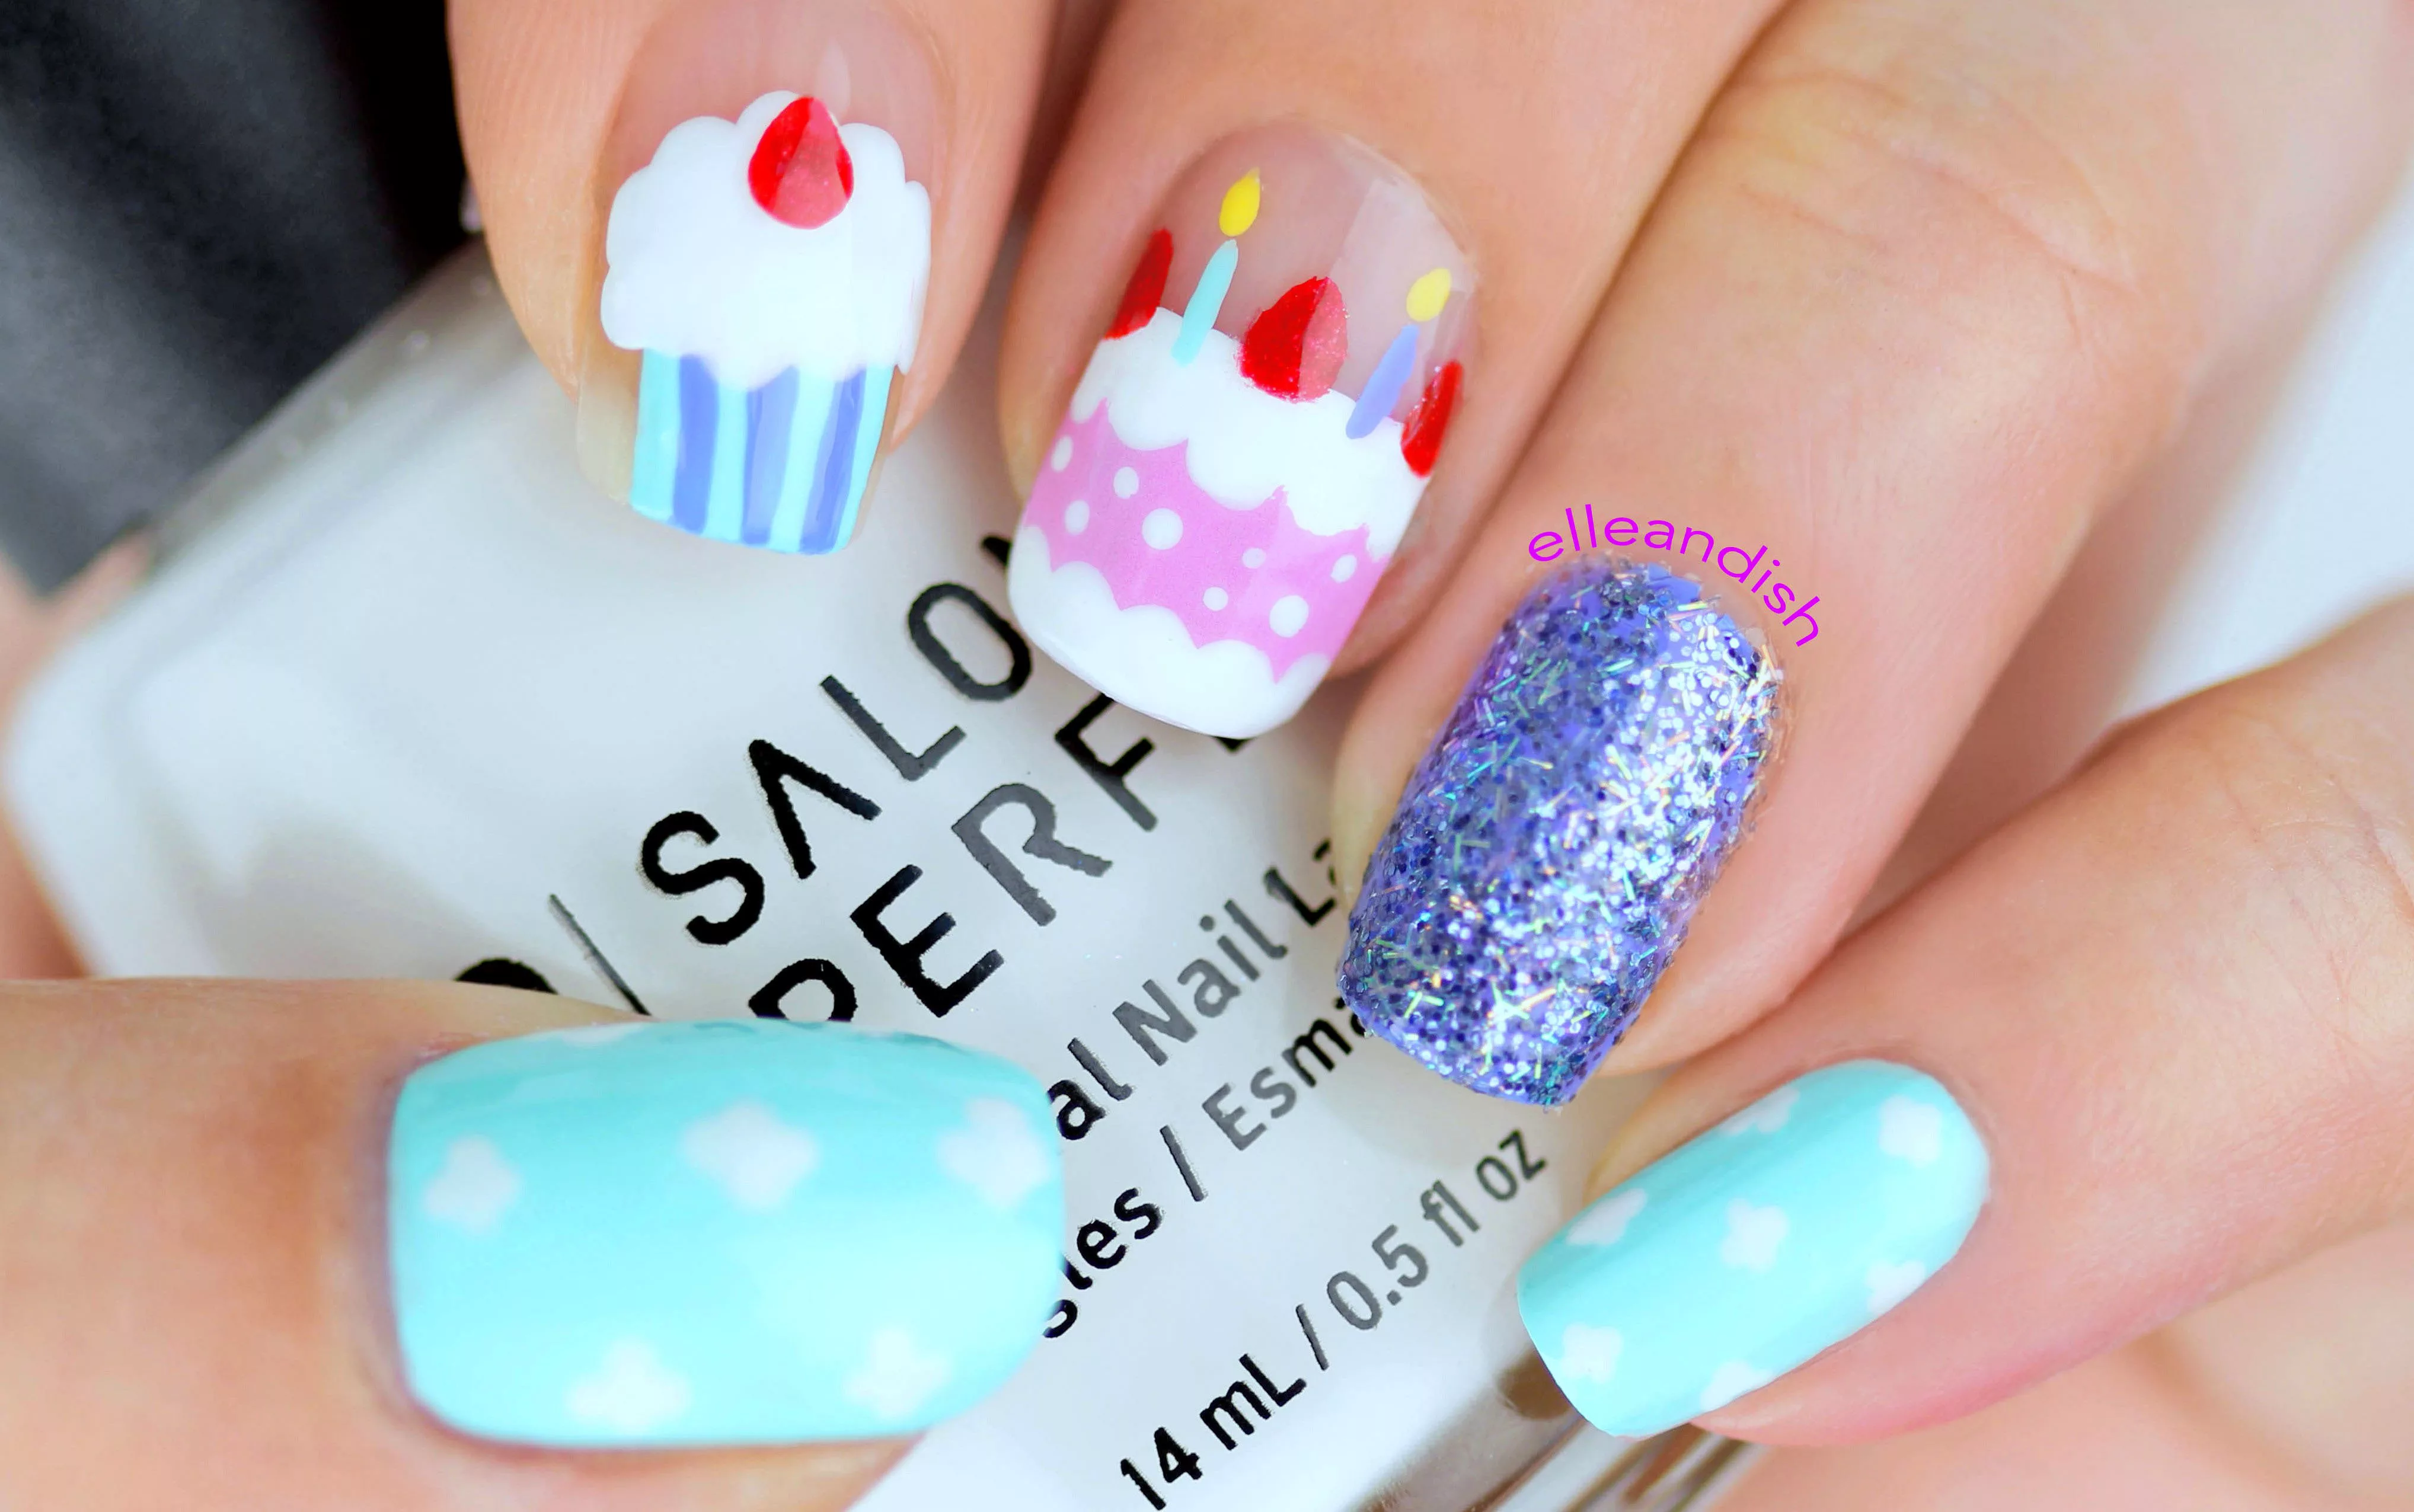 1. Birthday Nail Art Ideas for Short Nails - wide 6